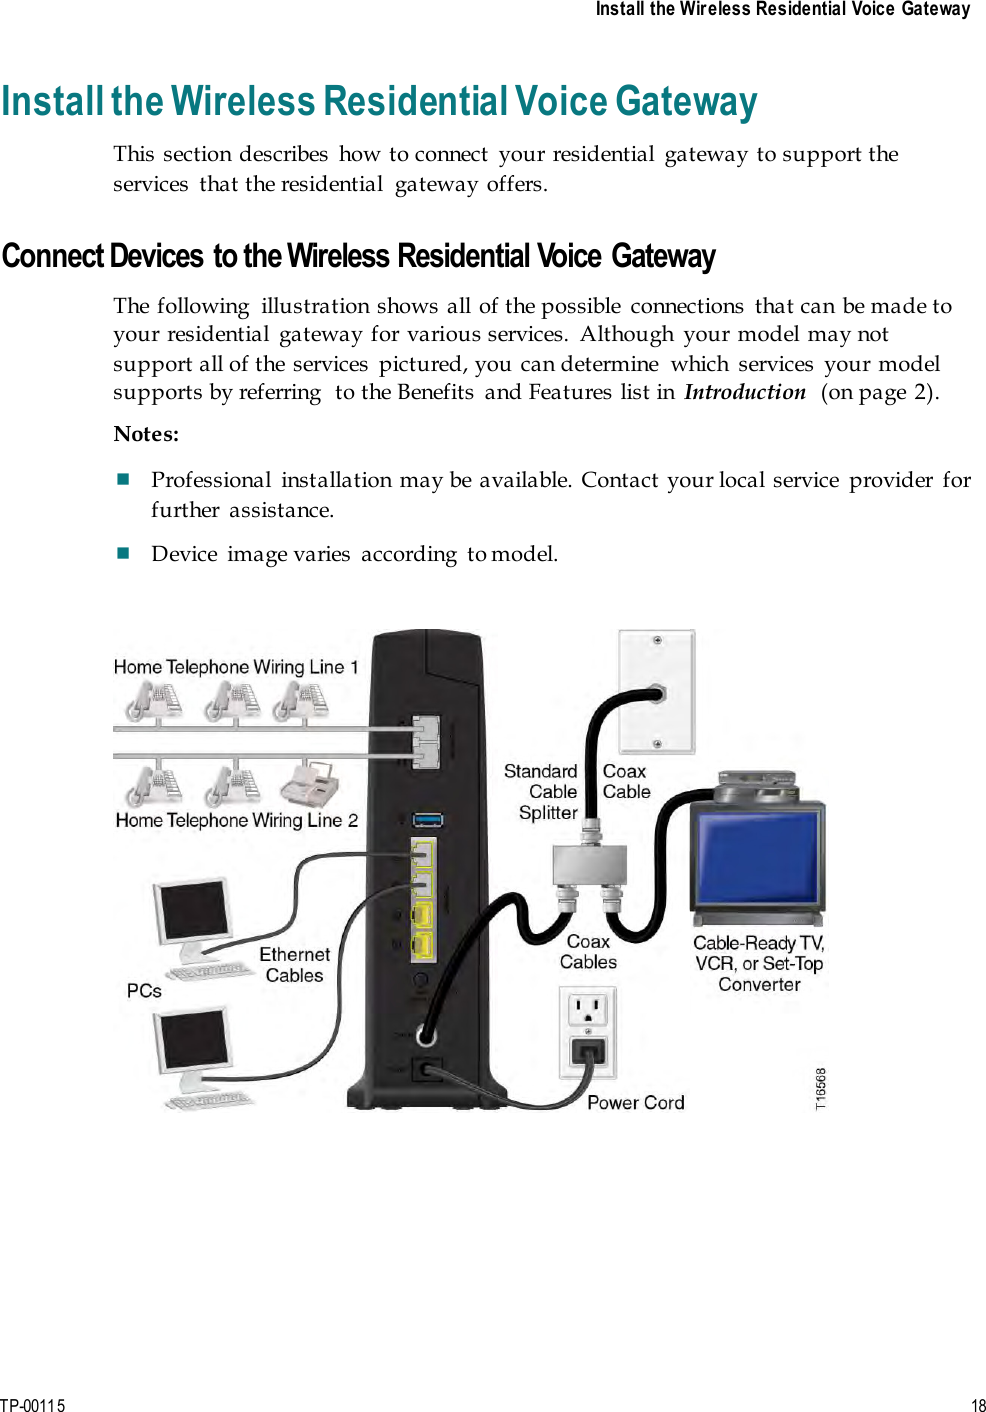 Install the Wireless Residential Voice Gateway TP-00115  18 Install the Wireless Residential Voice Gateway This section describes  how to connect  your residential  gateway to support the services  that the residential  gateway offers.  Connect Devices to the Wireless Residential Voice Gateway The following  illustration shows  all of the possible  connections  that can be made to your residential  gateway for various services.  Although  your model may not support all of the  services  pictured, you  can determine  which  services  your model supports by referring  to the Benefits  and Features list in  Introduction  (on page  2). Notes:  Professional  installation may be available. Contact your local service  provider  for further  assistance.  Device  image varies  according  to model. 